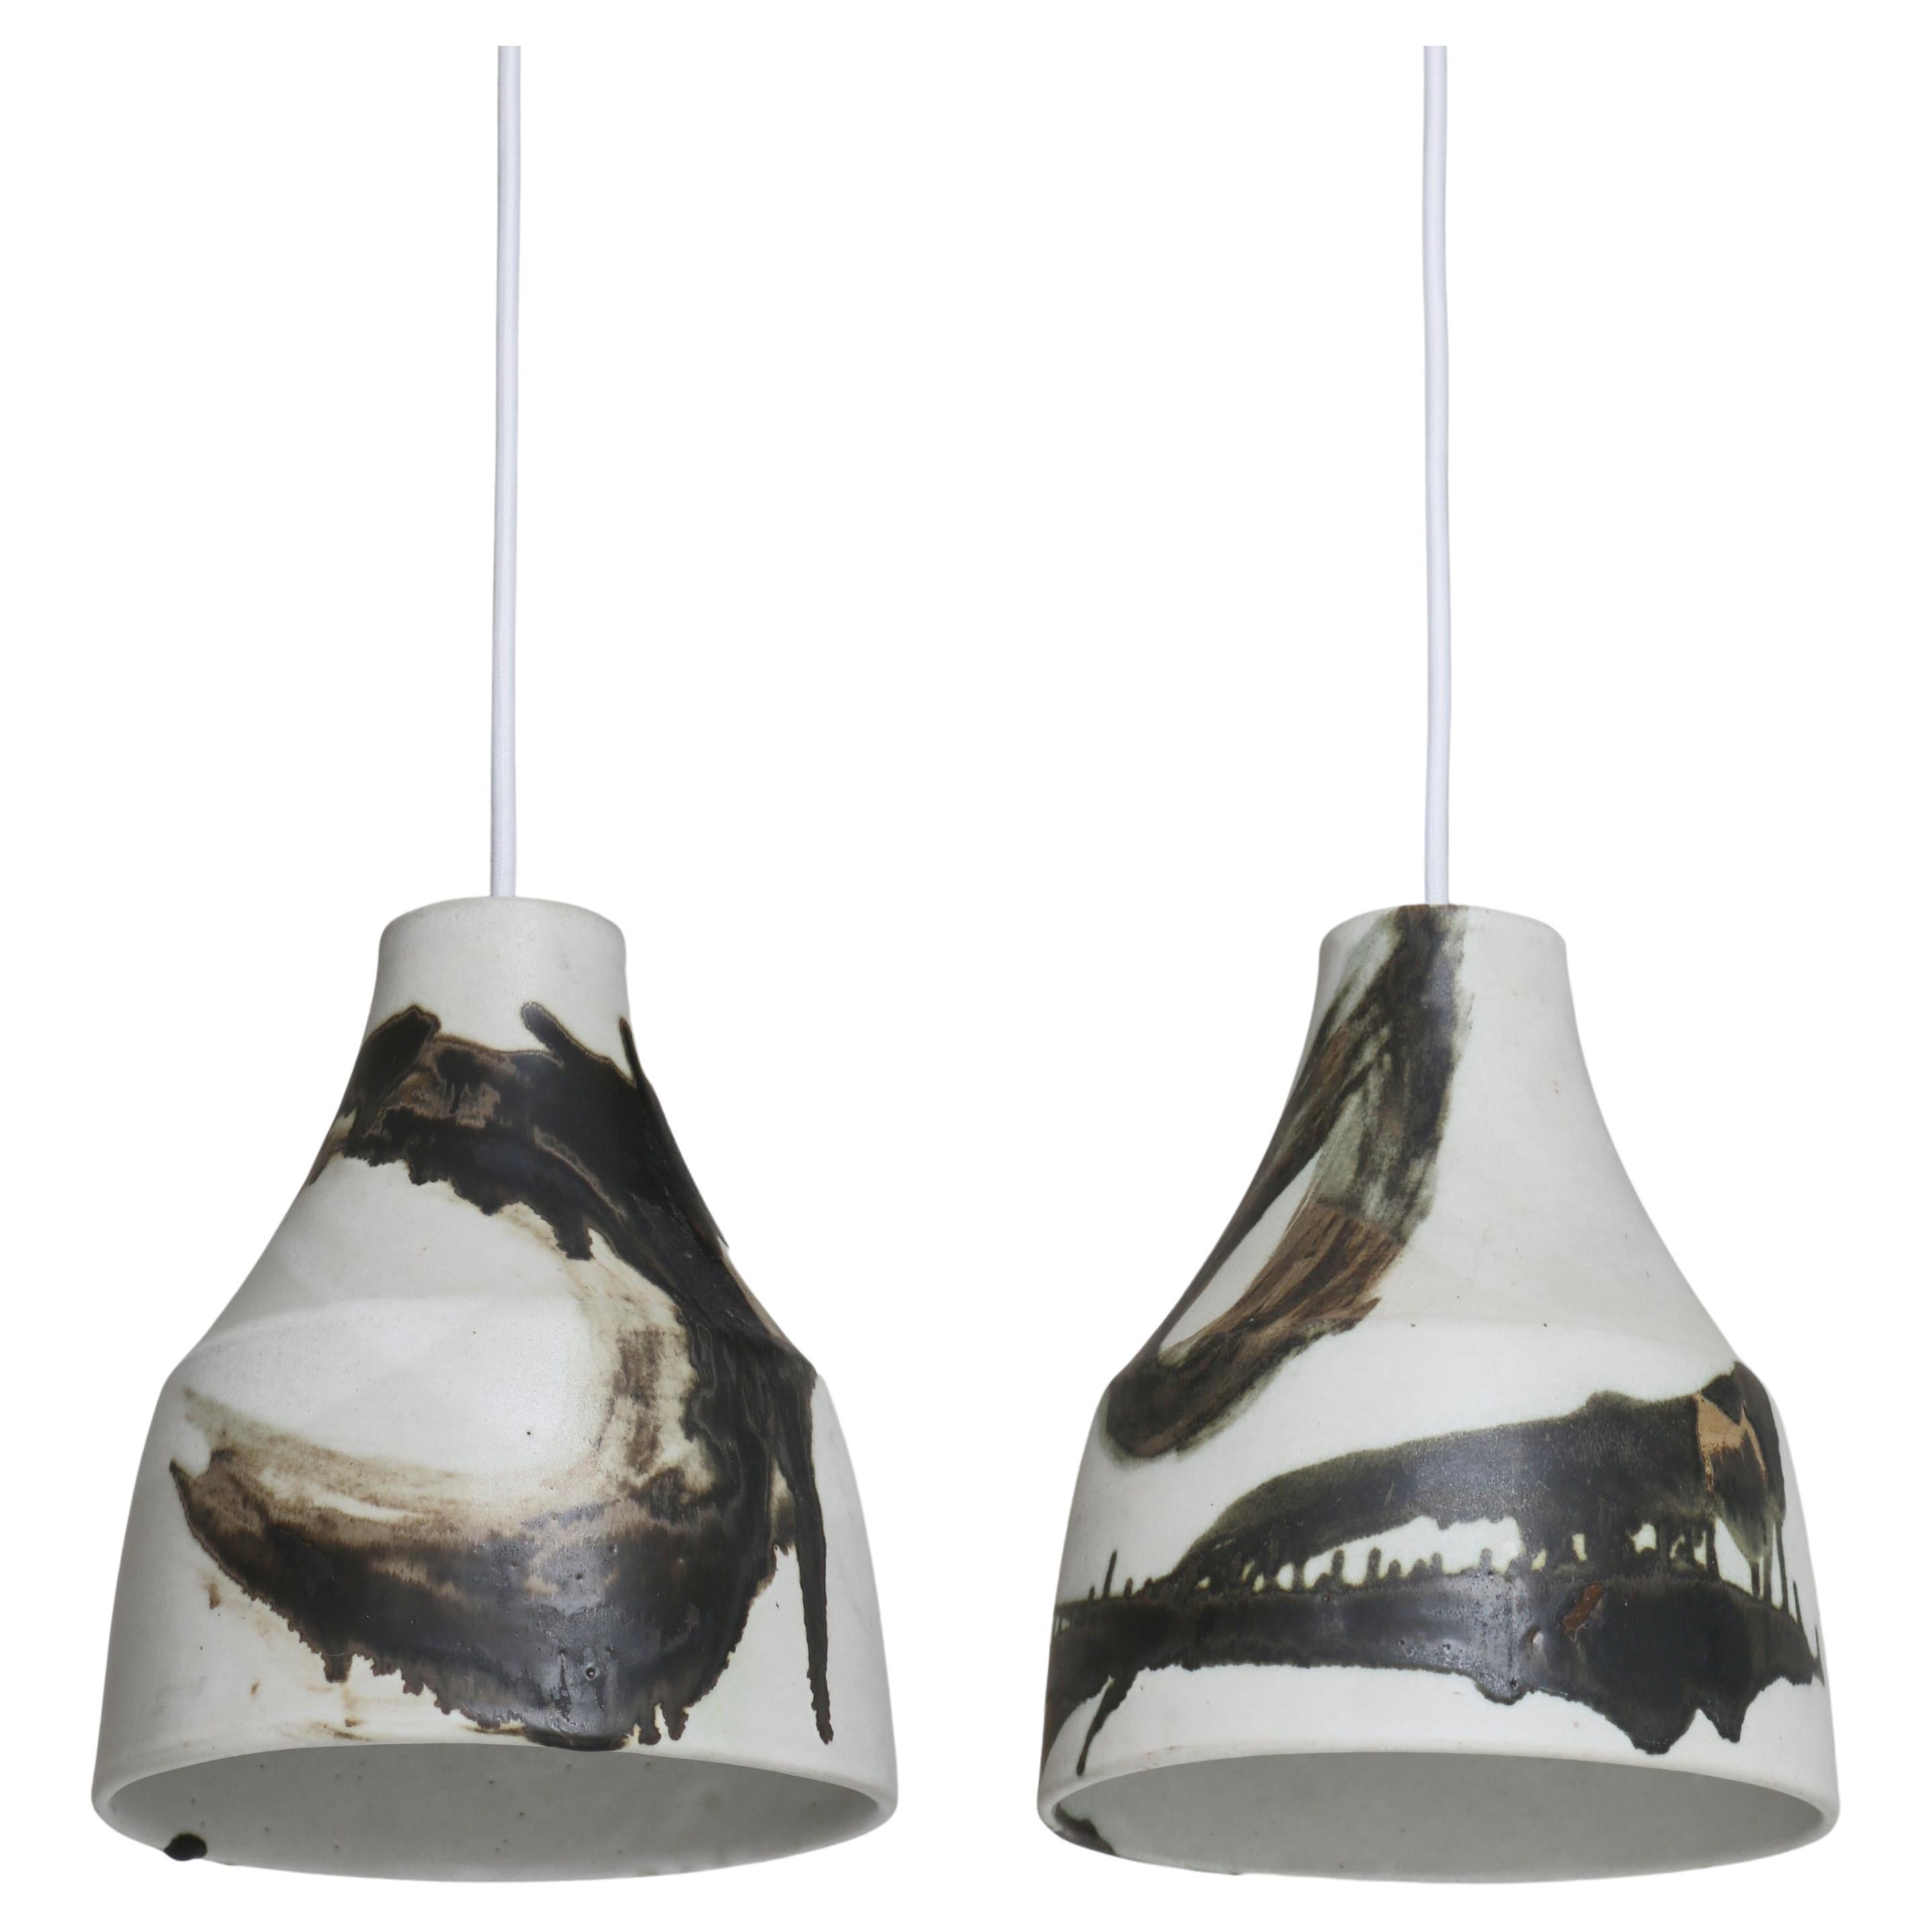 Unique Danish Søholm Stoneware Lamps in Light Glazing and Earth Colors, 1960s